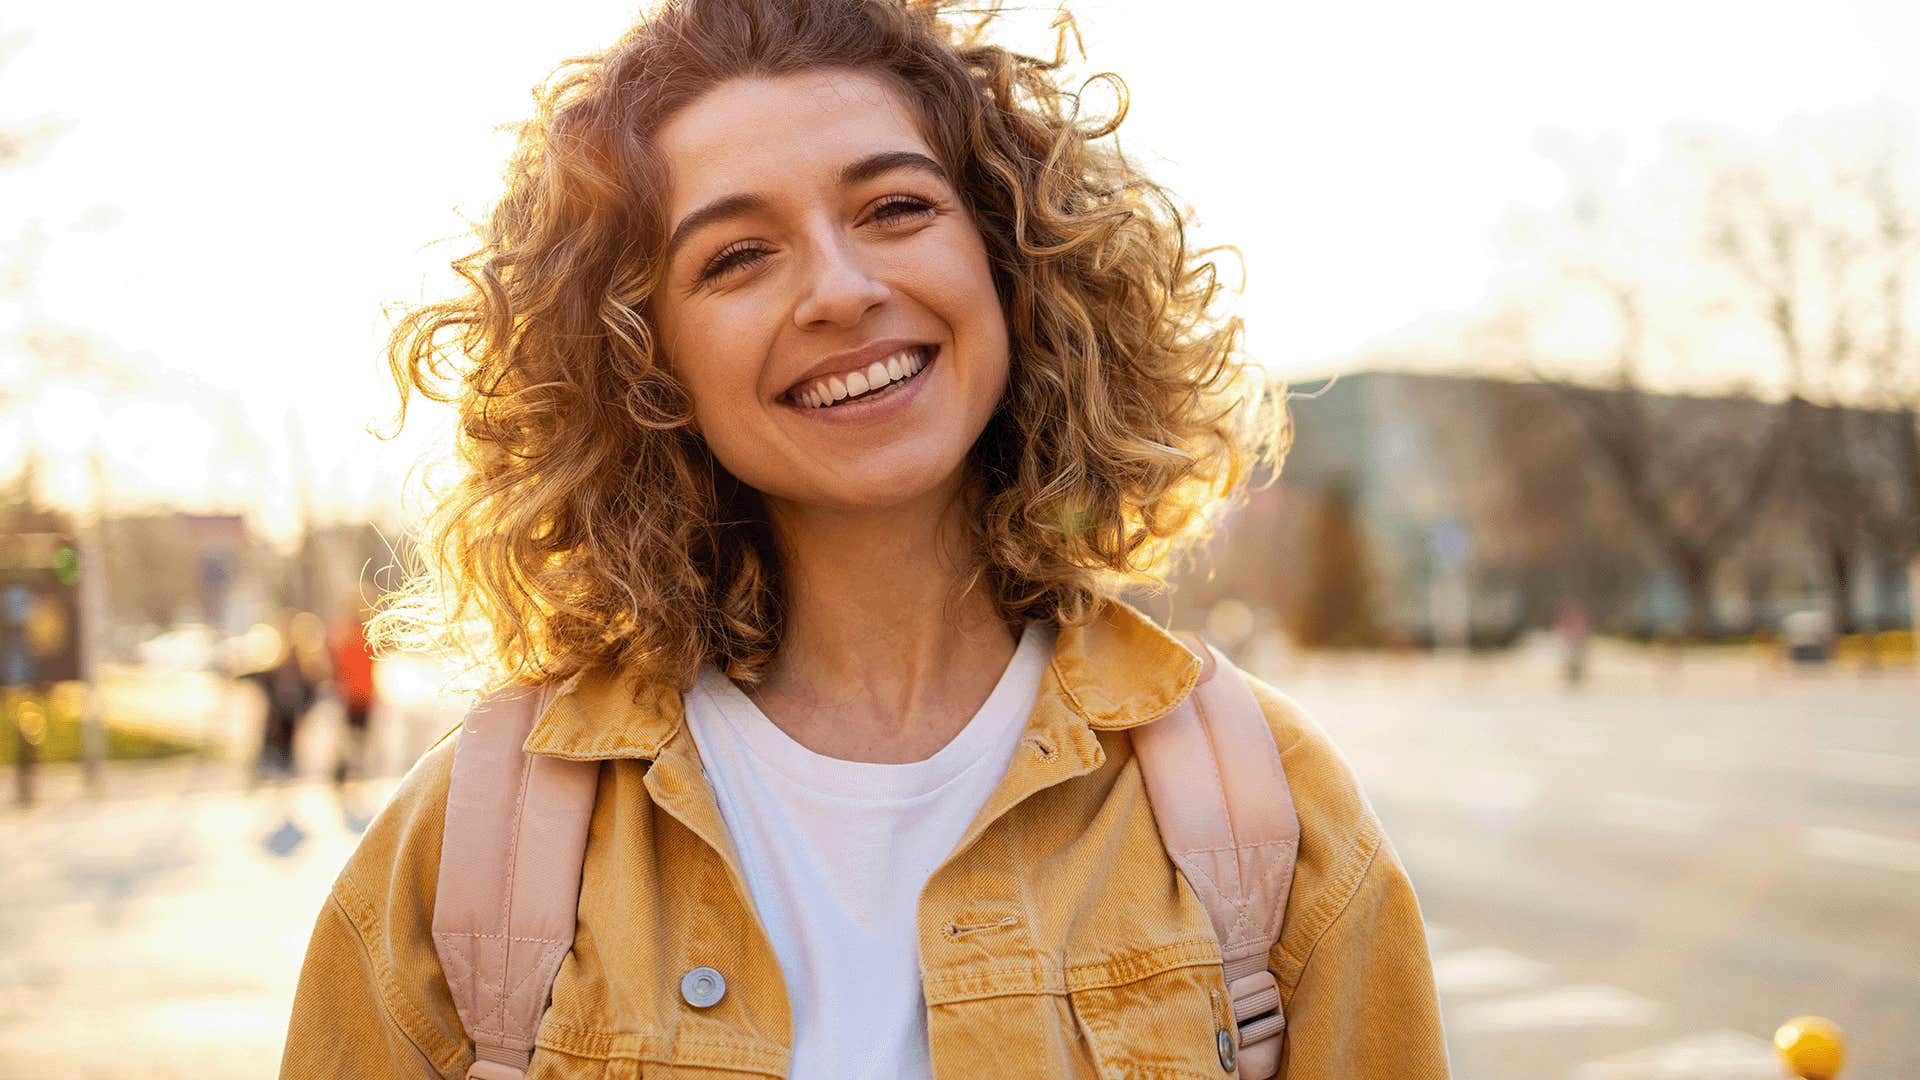 smiling woman with curly hair and yellow jacket